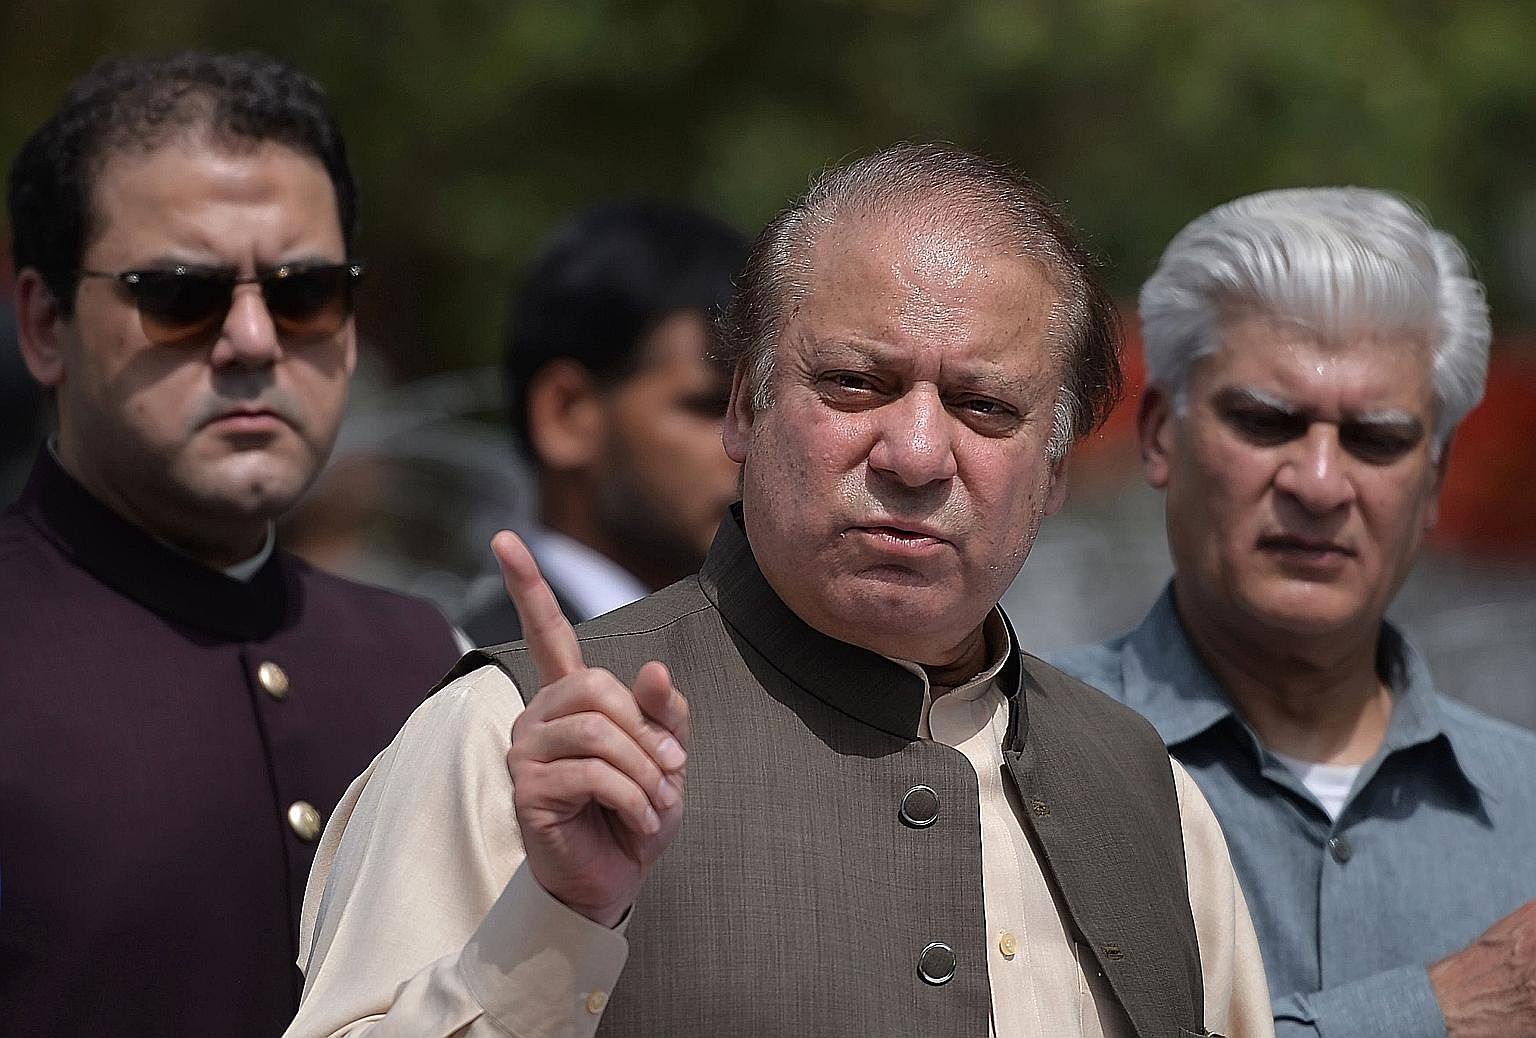 The Supreme Court directed criminal proceedings against Mr Nawaz Sharif and his family when they failed to prove that their properties in London were legal. The court also disqualified Mr Sharif from office because in his electoral declarations, he d